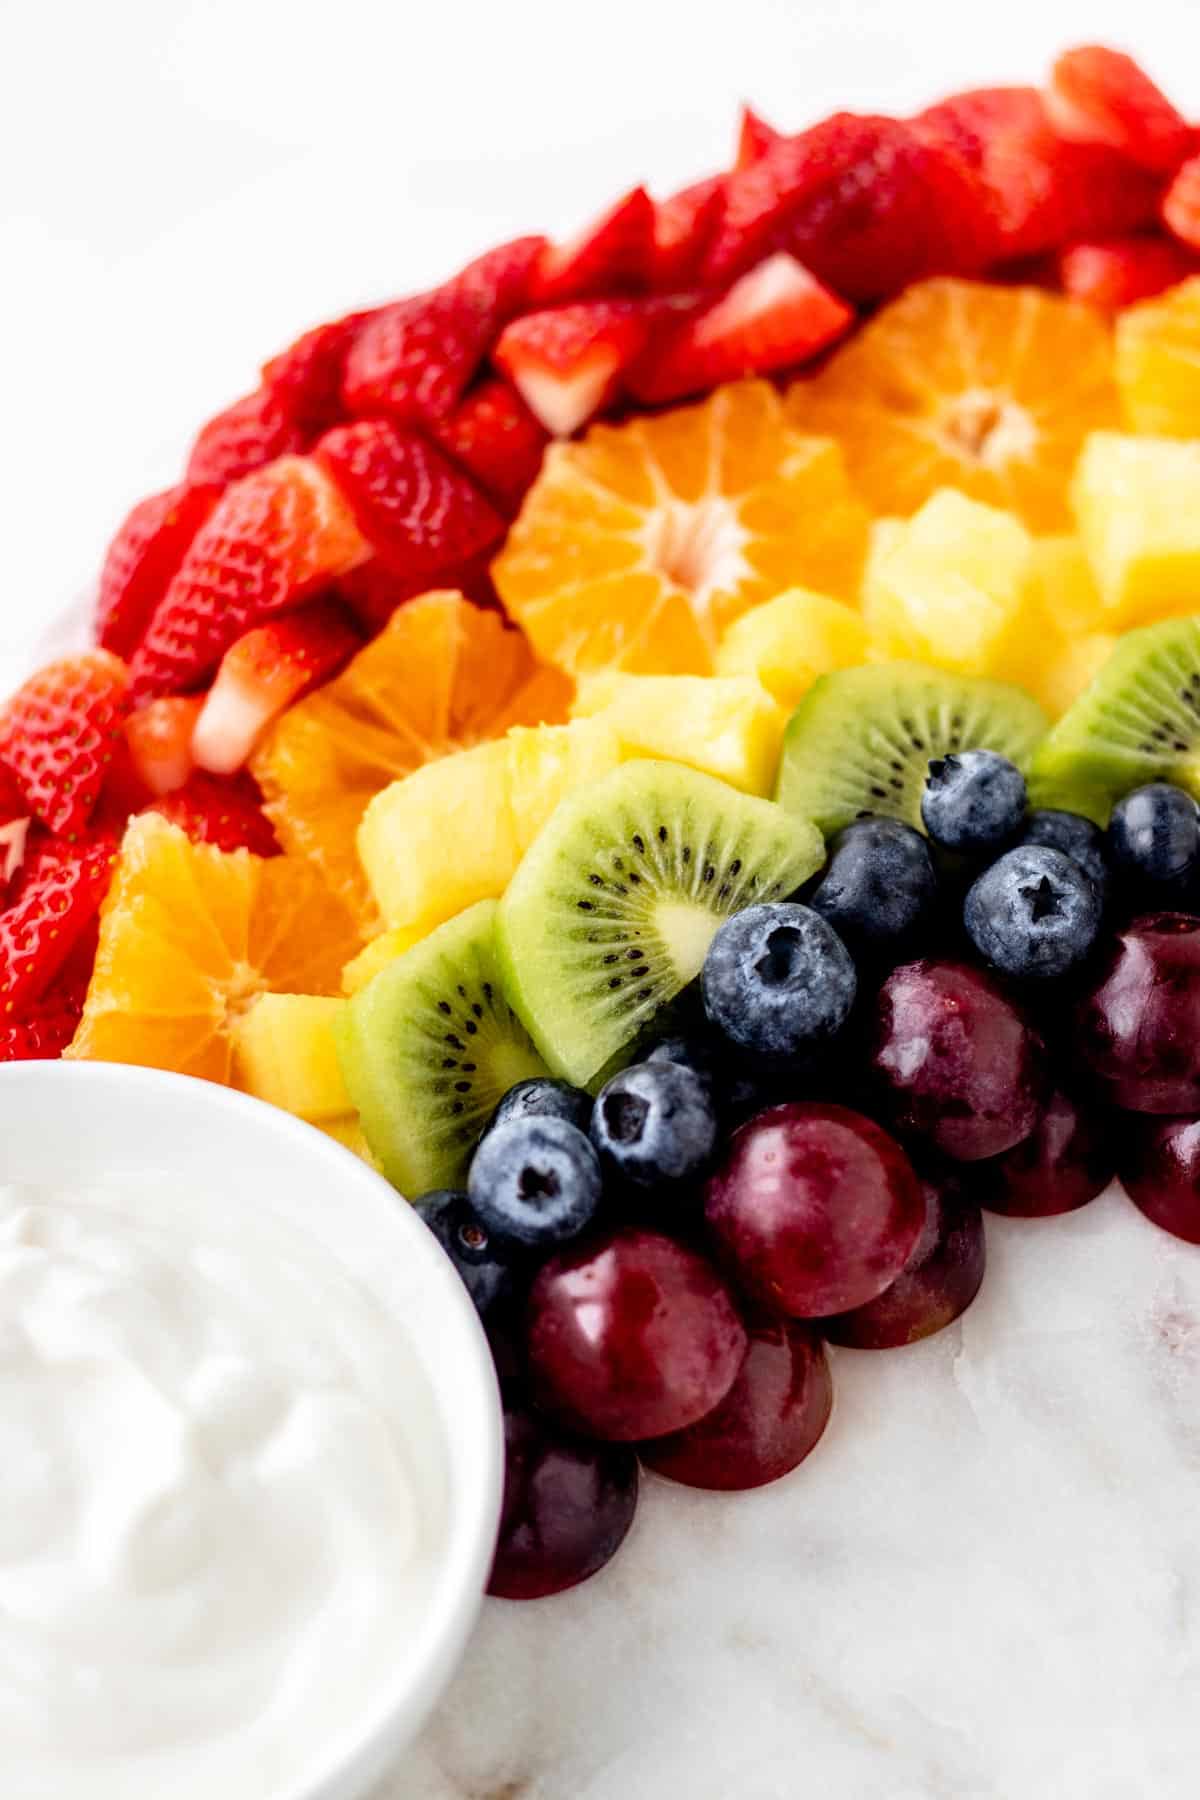 A close-up of a small section of the rainbow fruit board with yogurt dip.